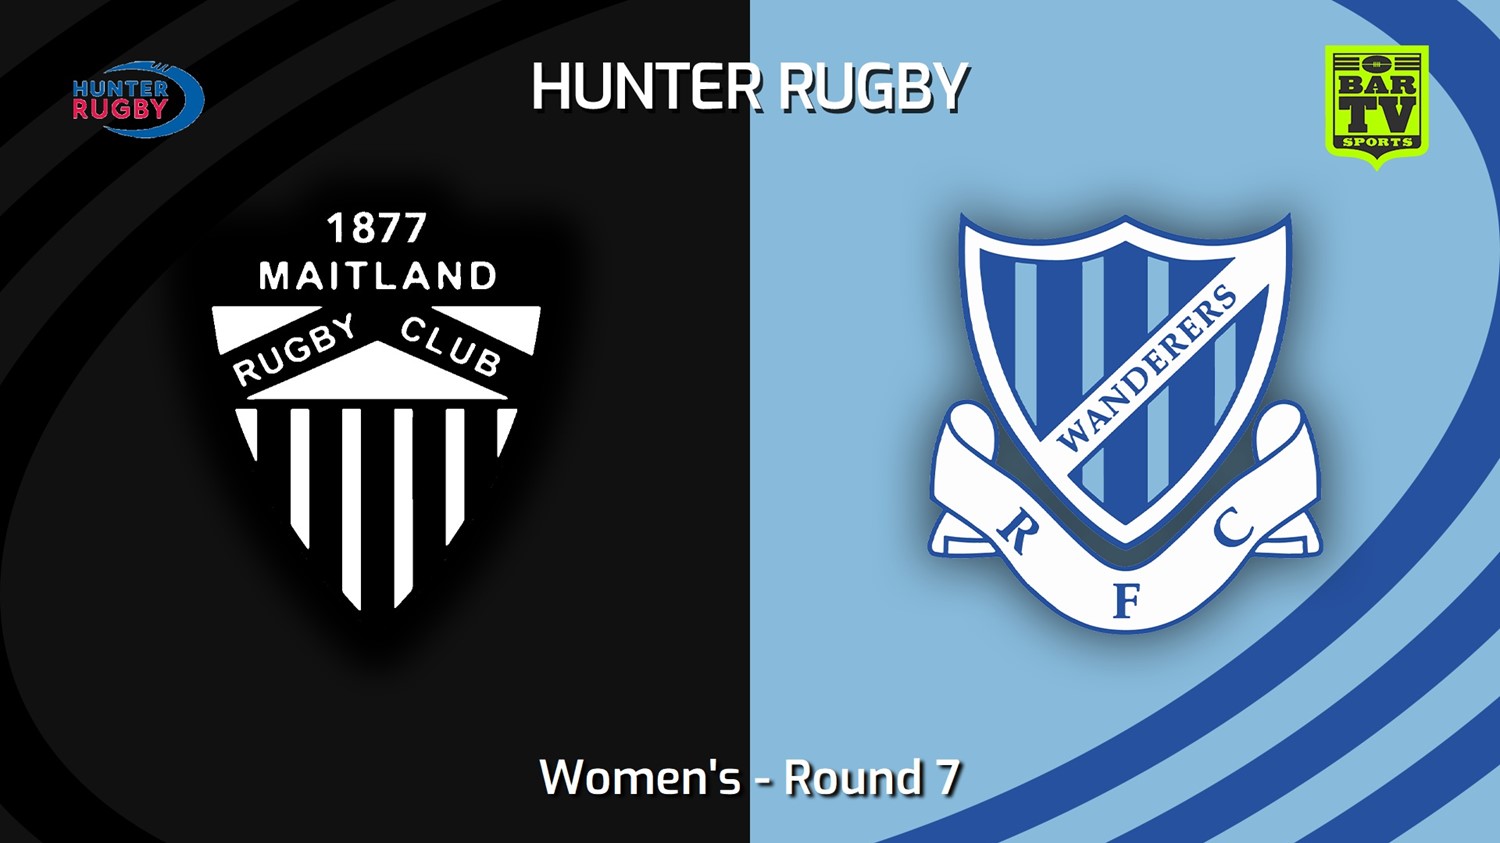 240525-video-Hunter Rugby Round 7 - Women's - Maitland v Wanderers Slate Image